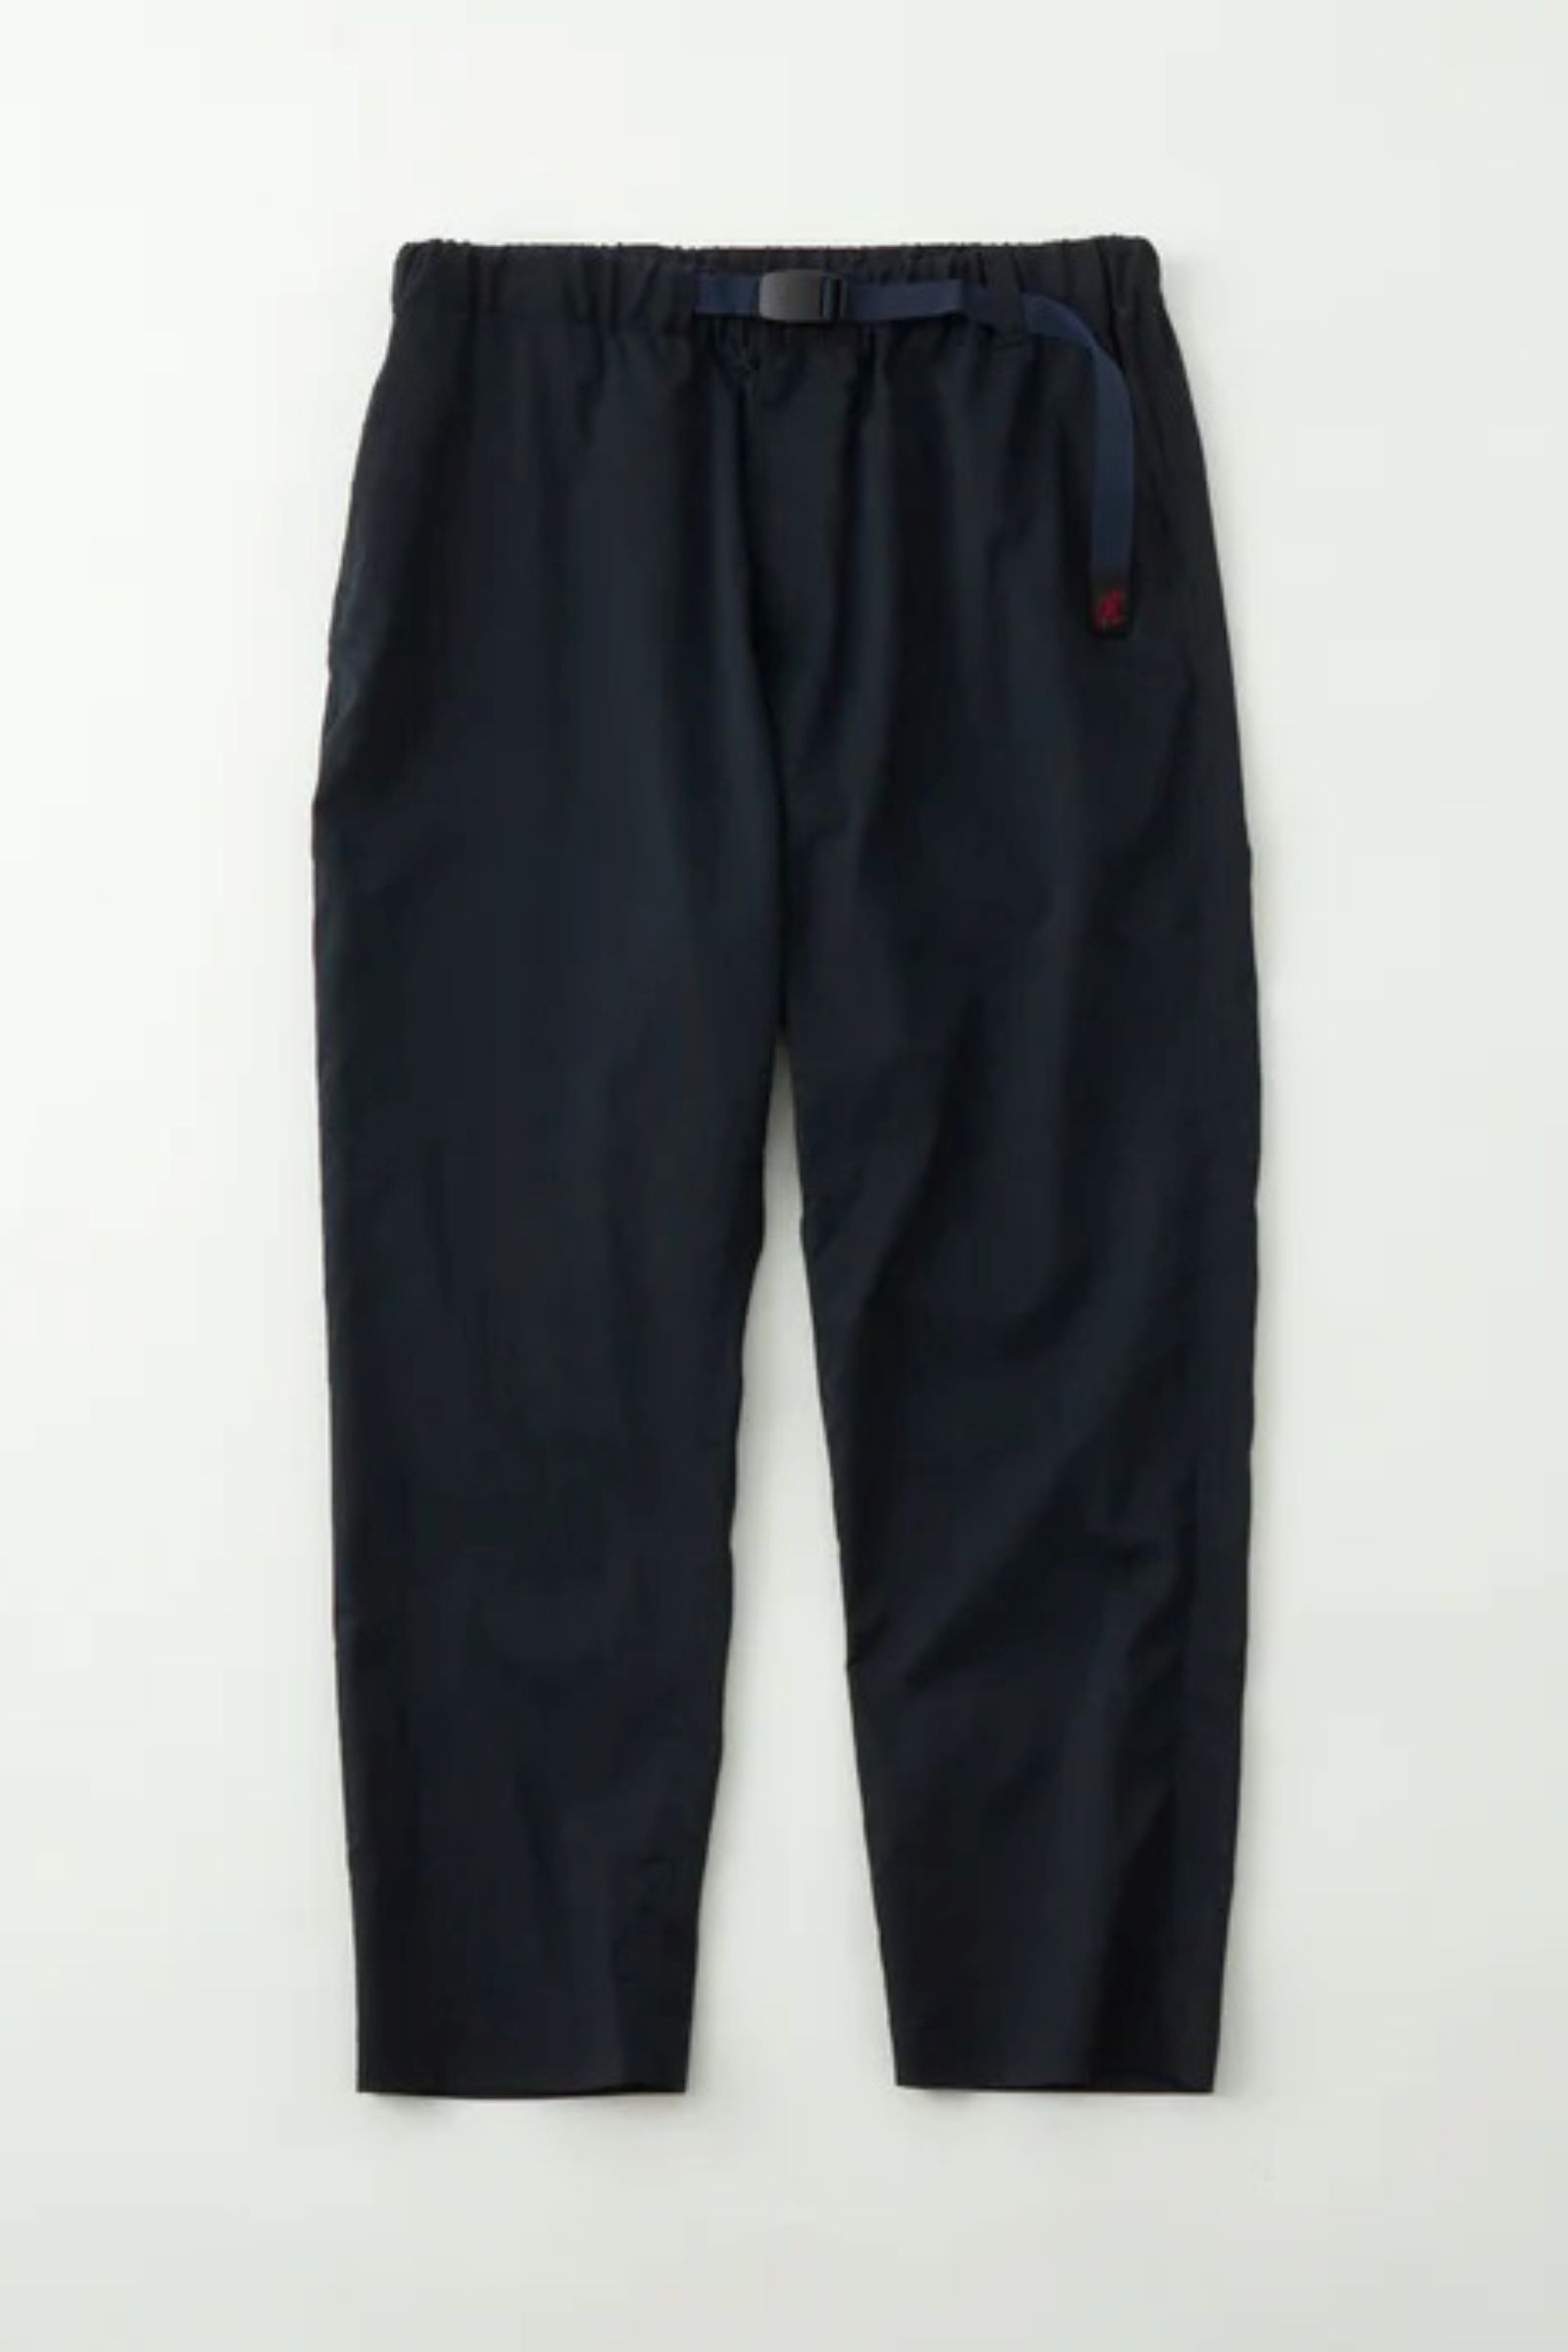 White Mountaineering - wm x gramicci tapered pants -navy- 23ss men ...